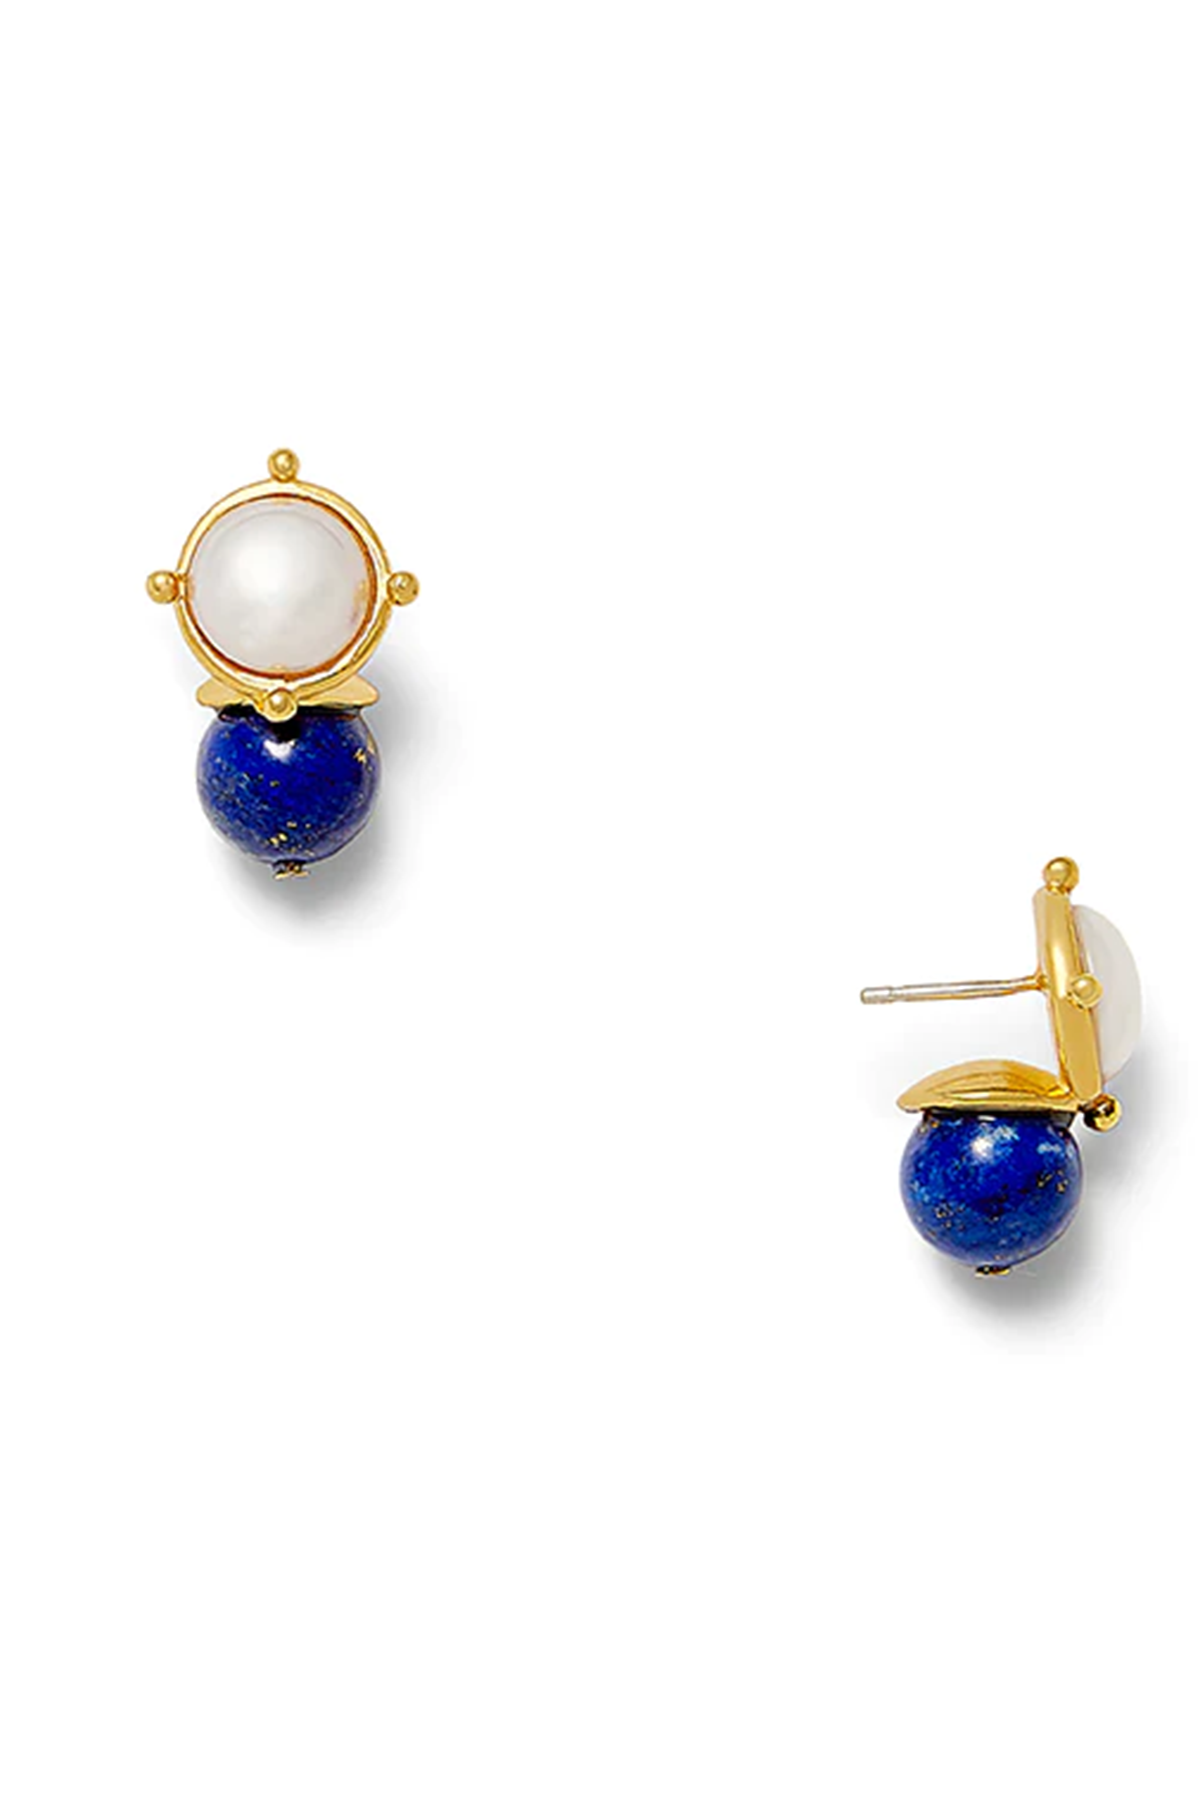 Pearl and blue earring